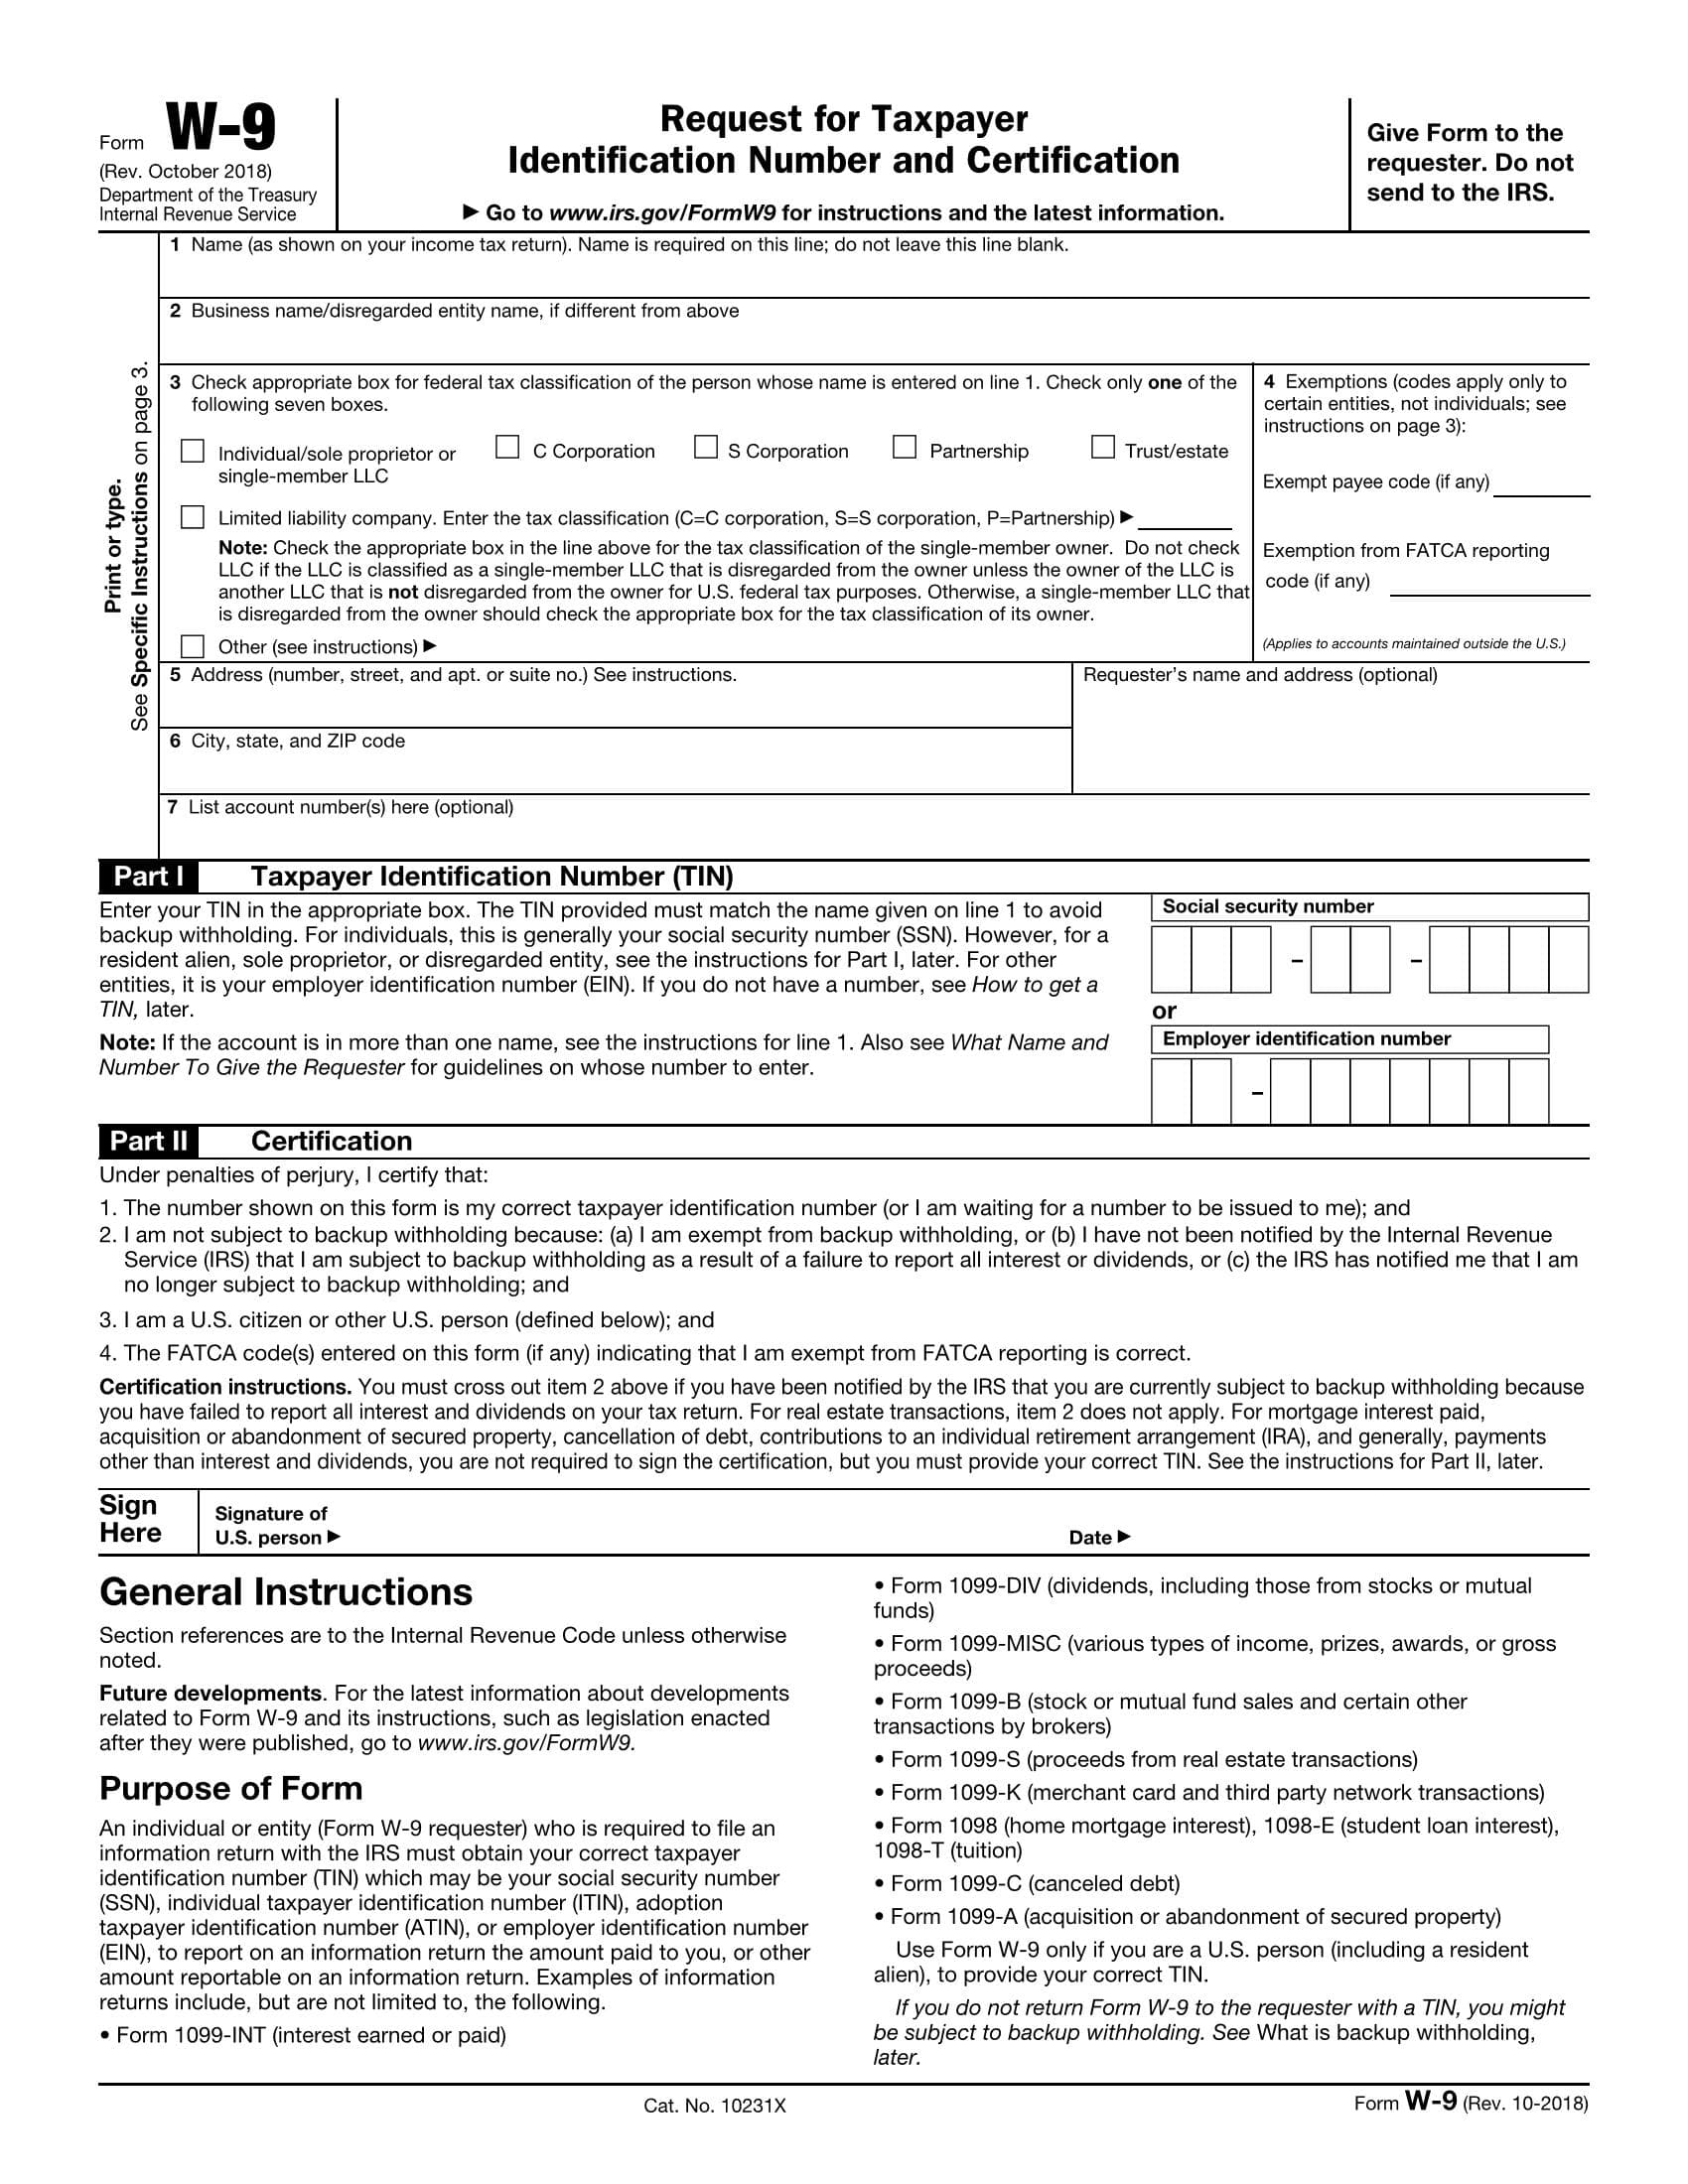 w9-form-fillable-request-for-taxpayer-identification-number